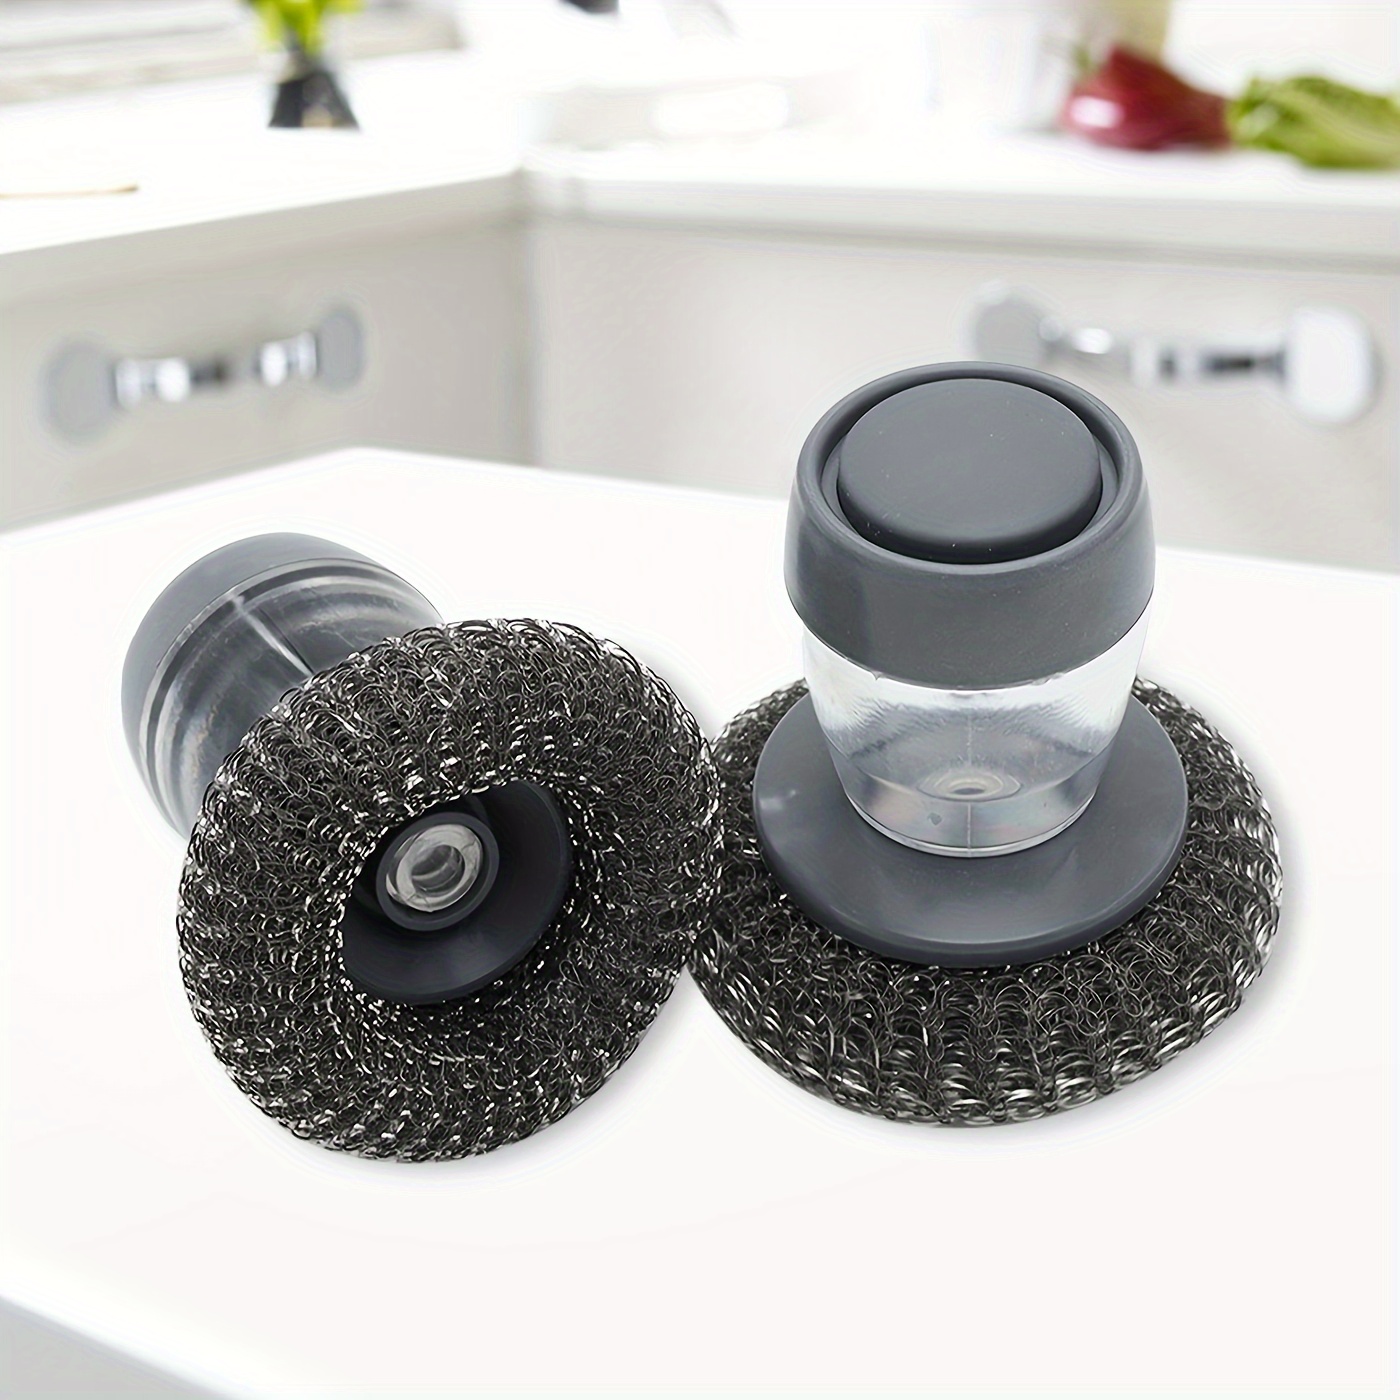 3Pcs Multi-Purpose Cleaning Brush Set, Stainless Steel Wool Brush,  Stainless Steel Wool Scrubber With Handle, Kitchen Scrubbing Brush /  Bendable Cleaning Brush, Heavy Duty Pot Scrubber For Pots, Pans, Grills,  Sinks, Kitchen